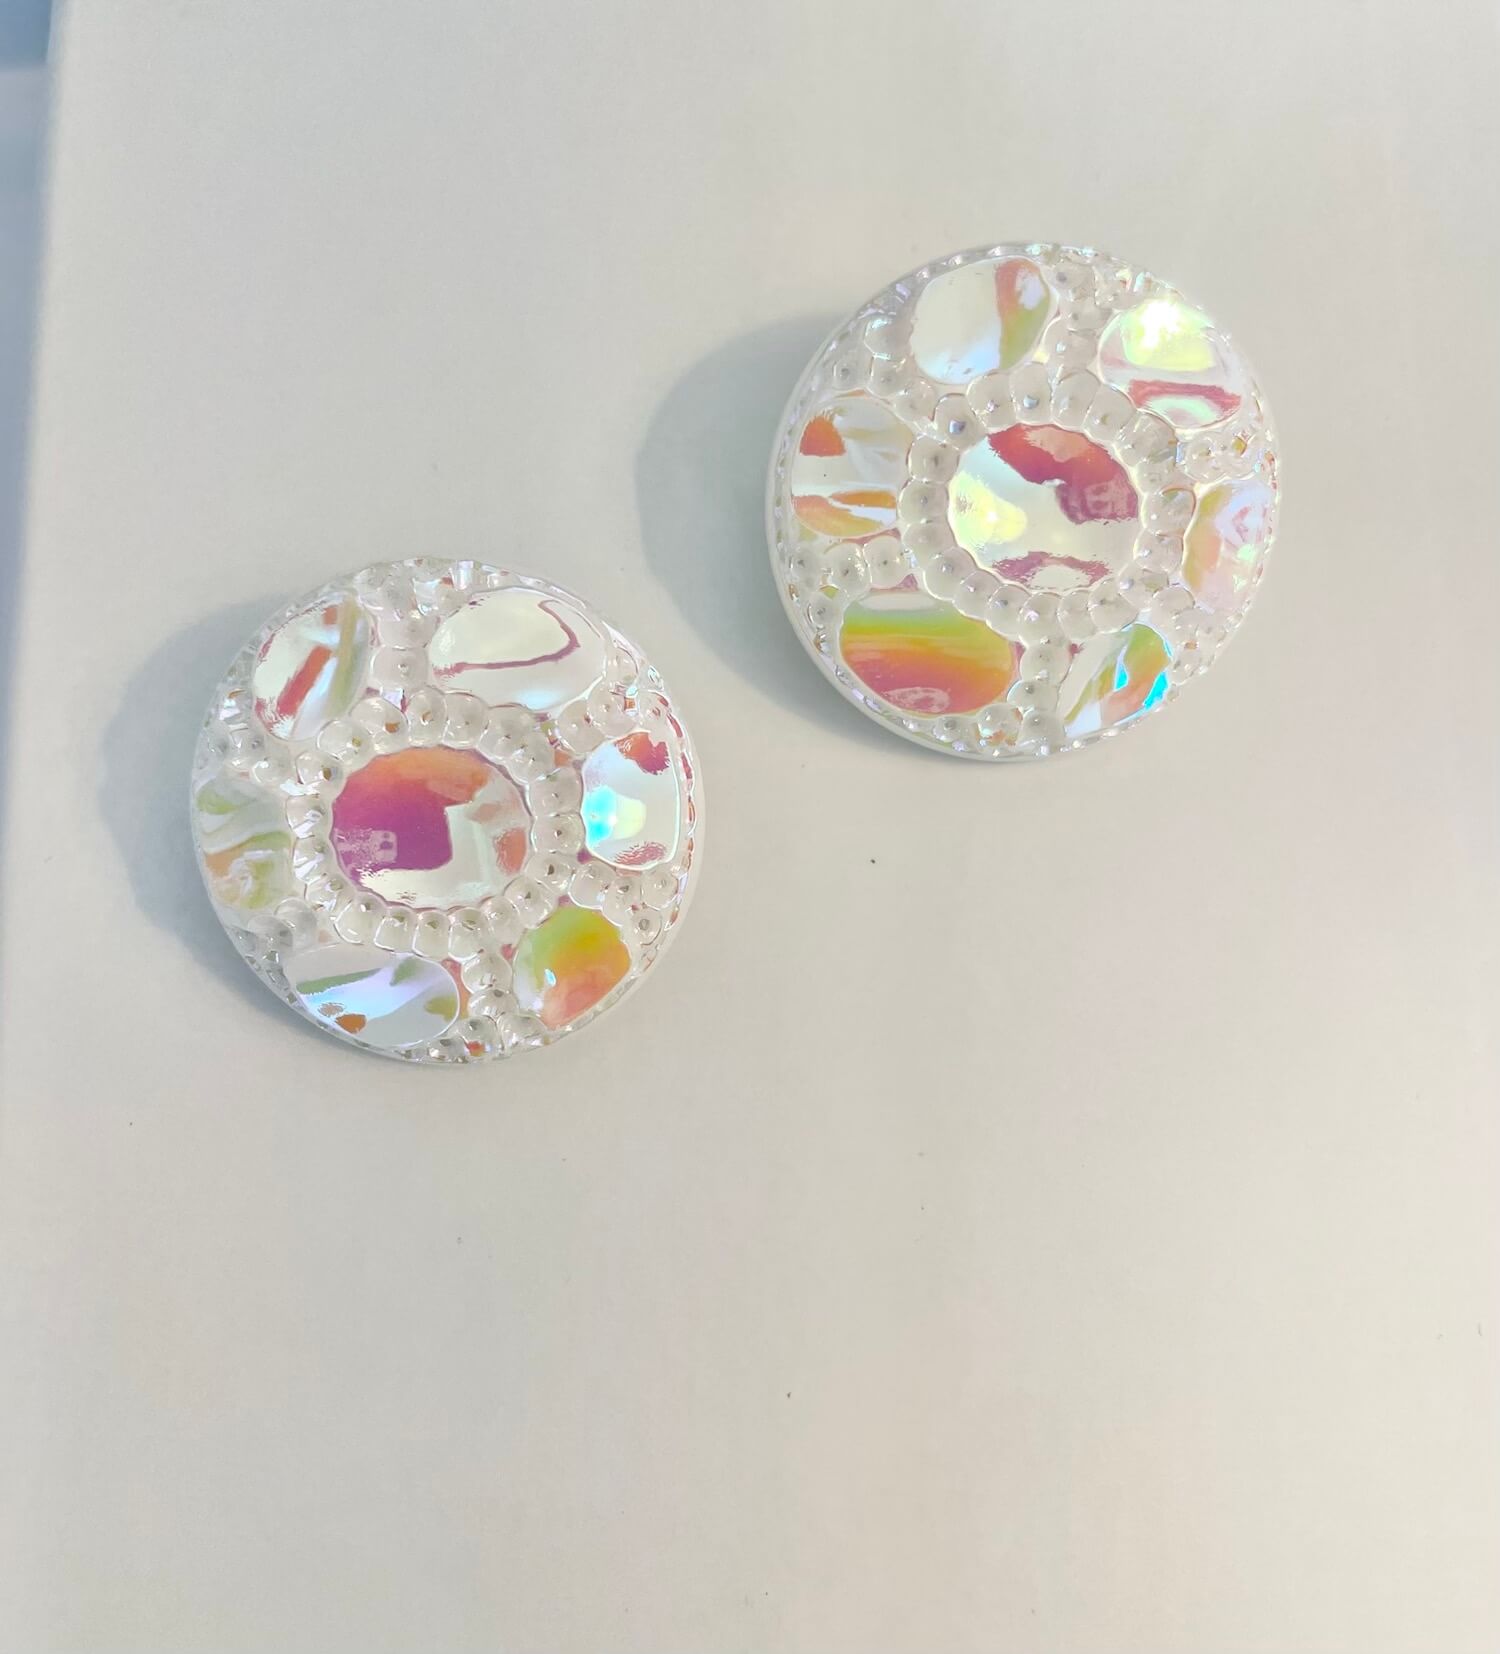 Vintage 1970's shimmery white button clip earrings.